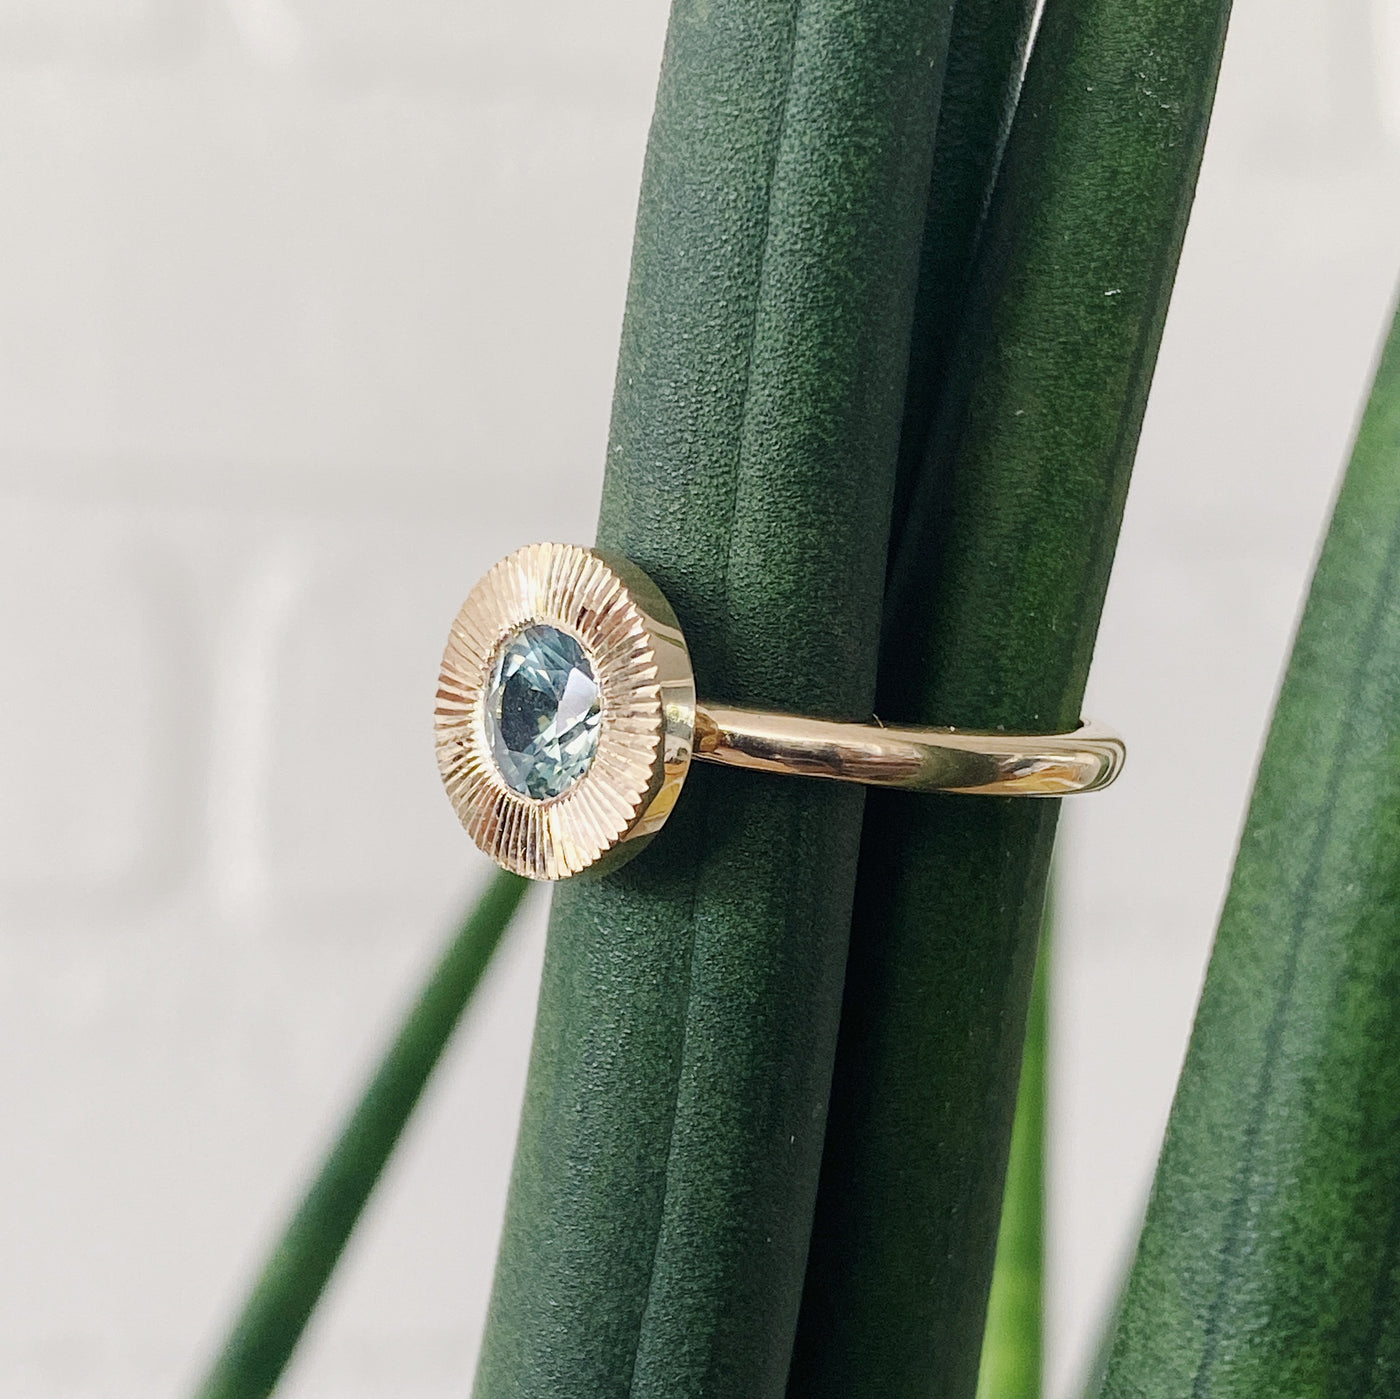 Side view of Round mint green Montana sapphire in a 14k yellow gold Aurora ring with an engraved halo border